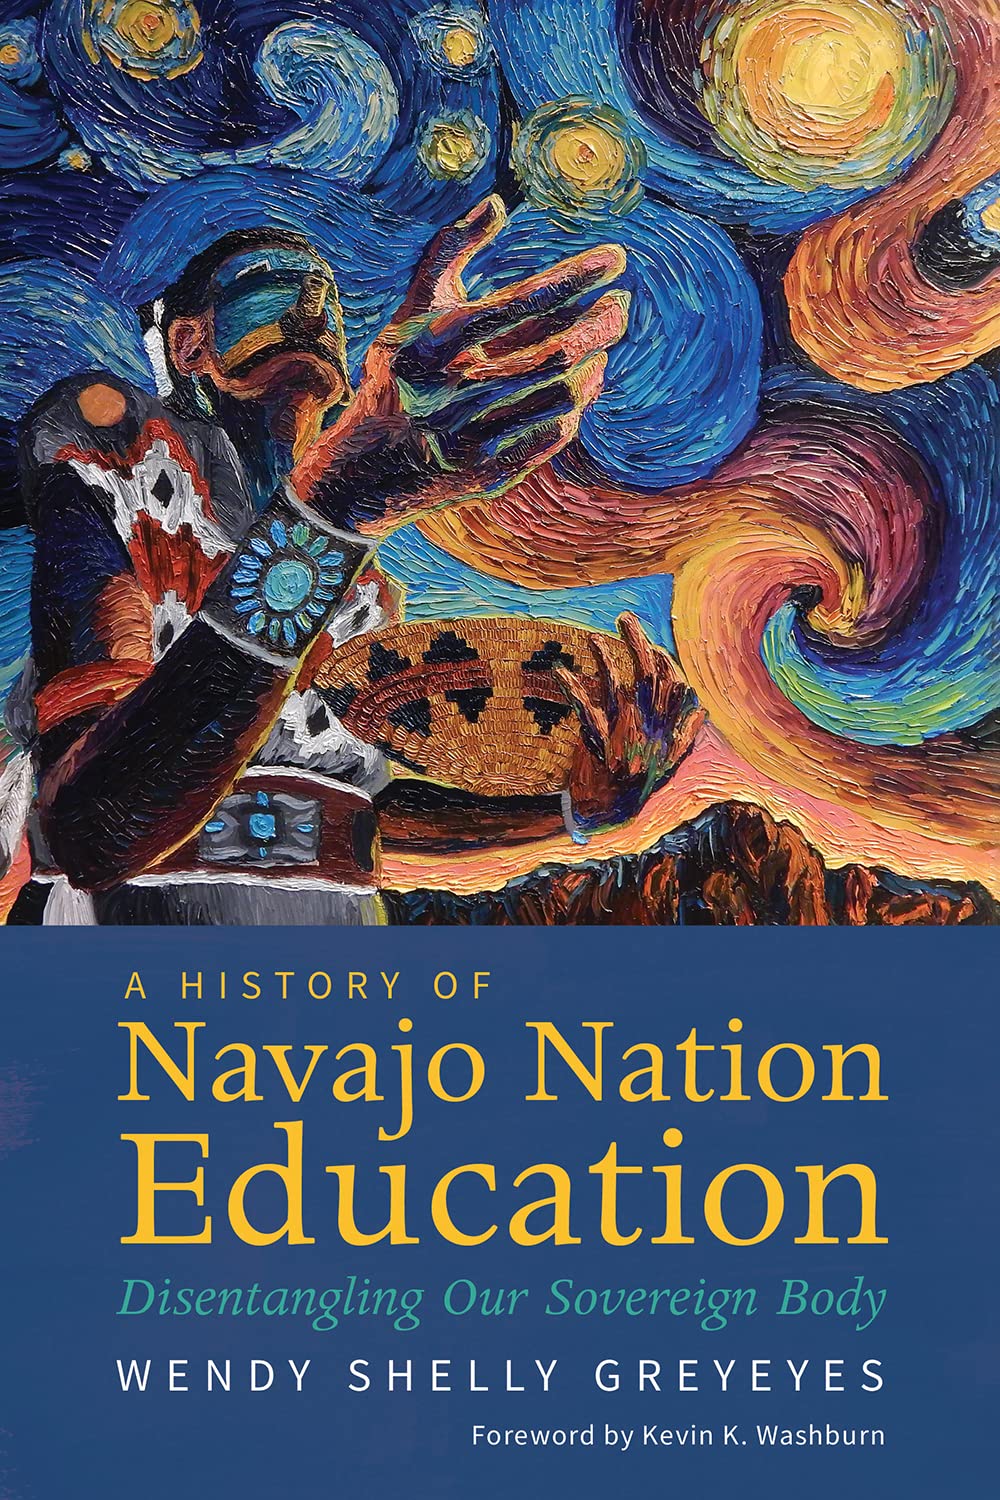 A History of Navajo Nation Education: Disentangling Our Sovereign Body by Wendy Shelly Greyeyes